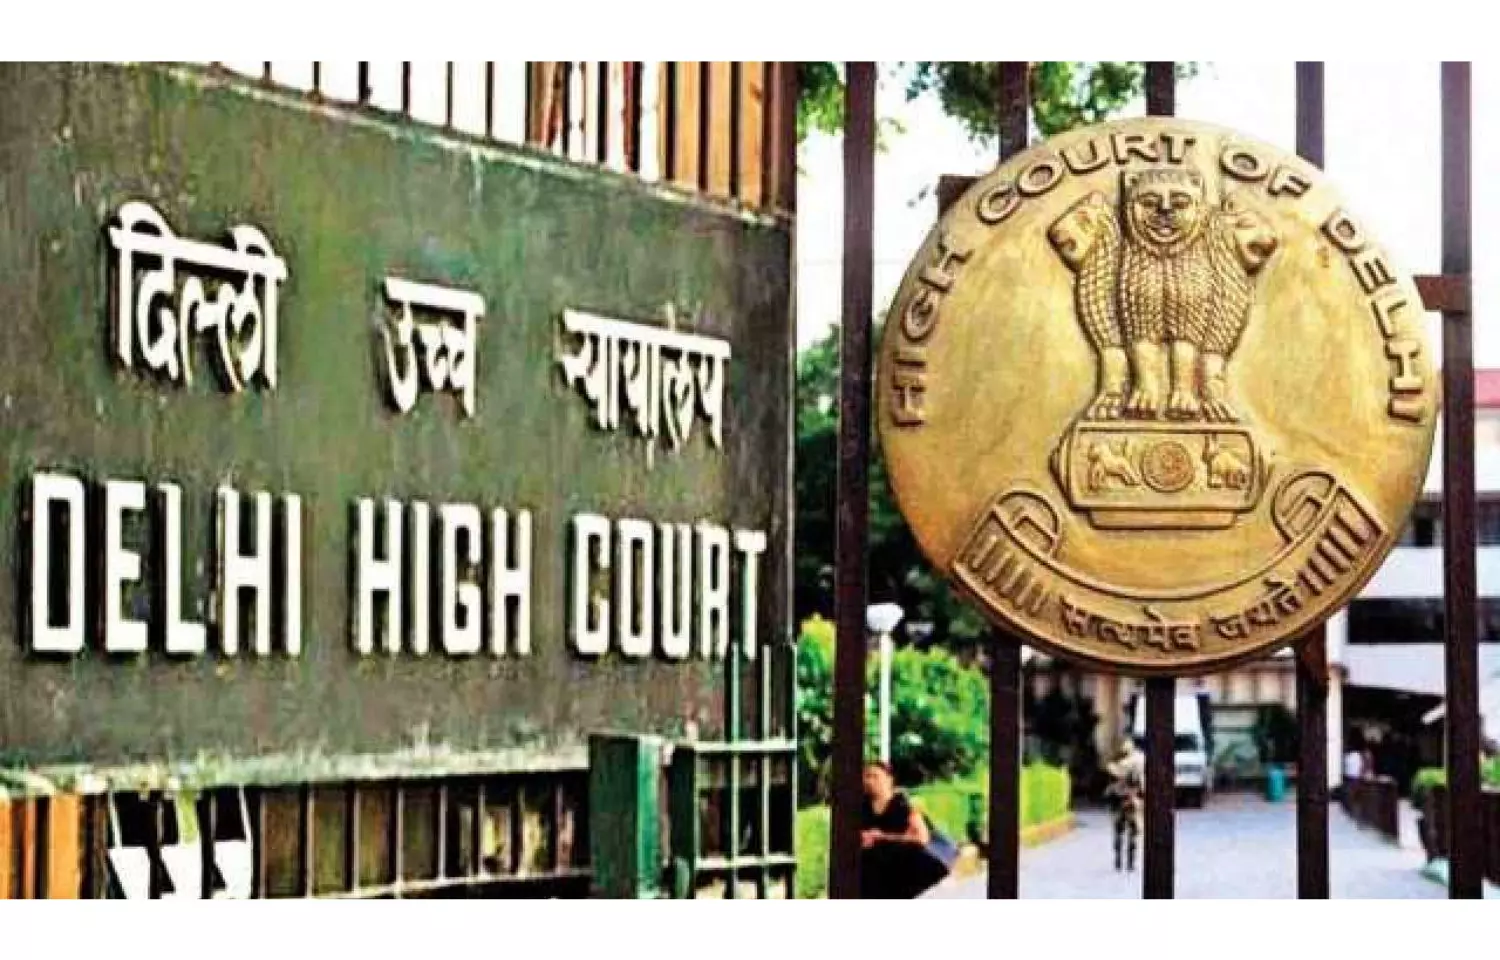 Pregnancies up to 24 weeks of unmarried women arising out of consensual relationships not covered under MTP Act: Delhi HC